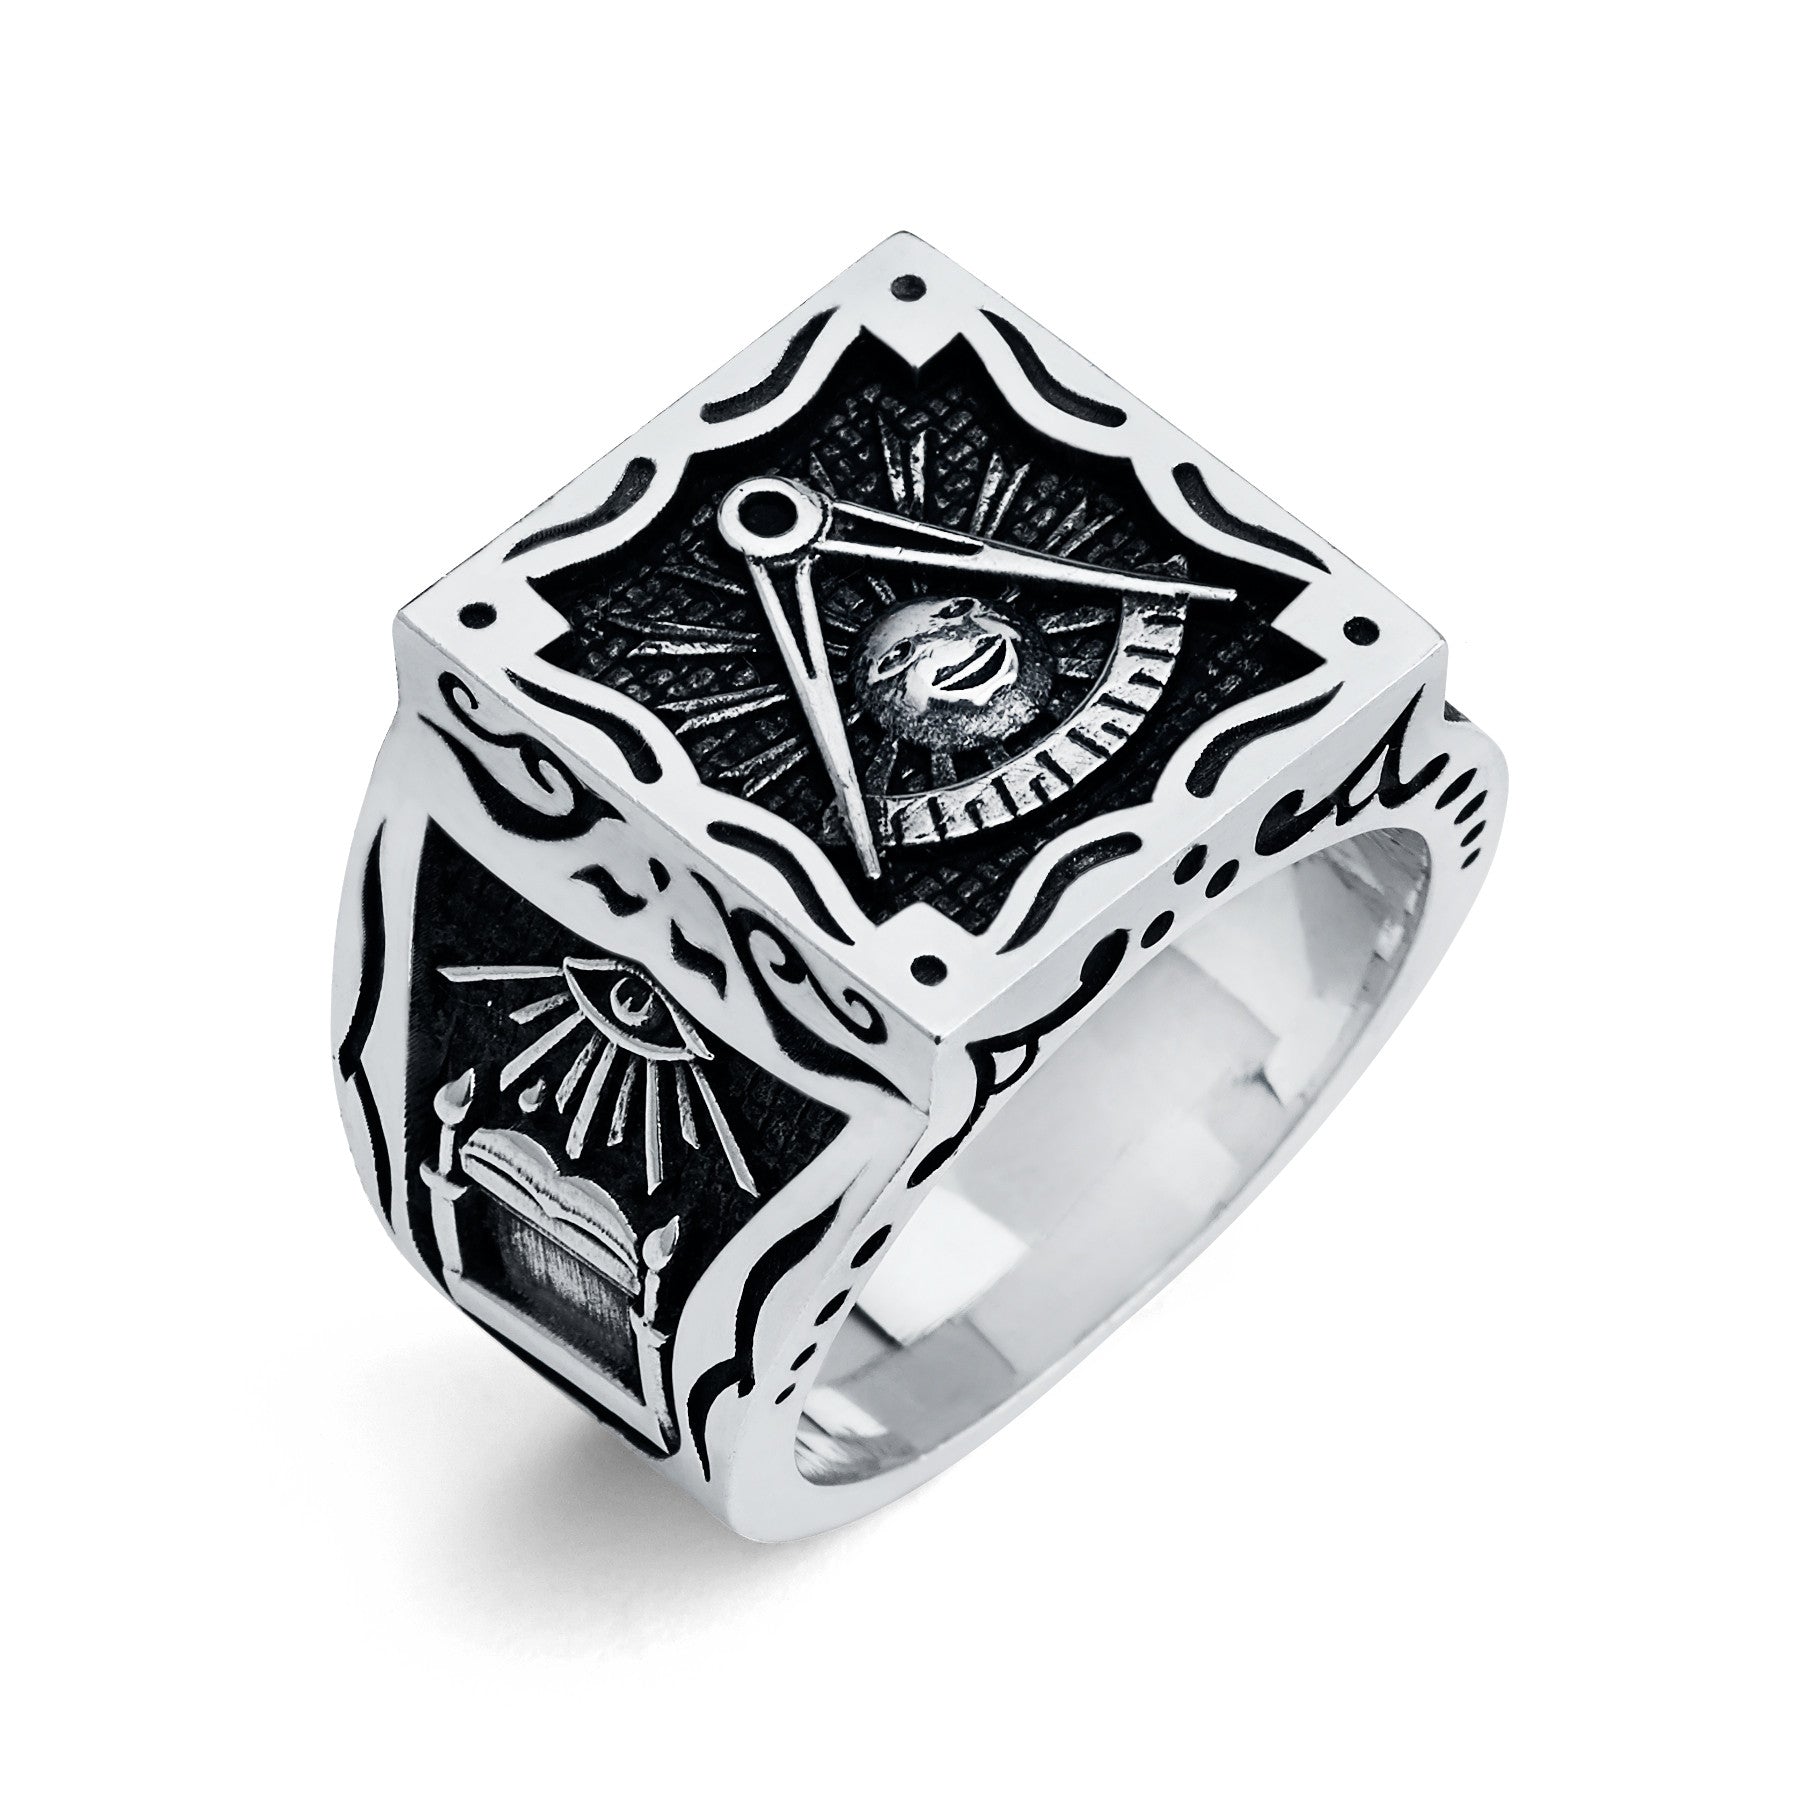 New Stainless Steel Mens Past Master Masonic Rings Gold Silver Two Tone  Freemason Mason Signet Ring Mens Jewelry From Dazzingjewelry, $2.87 |  DHgate.Com